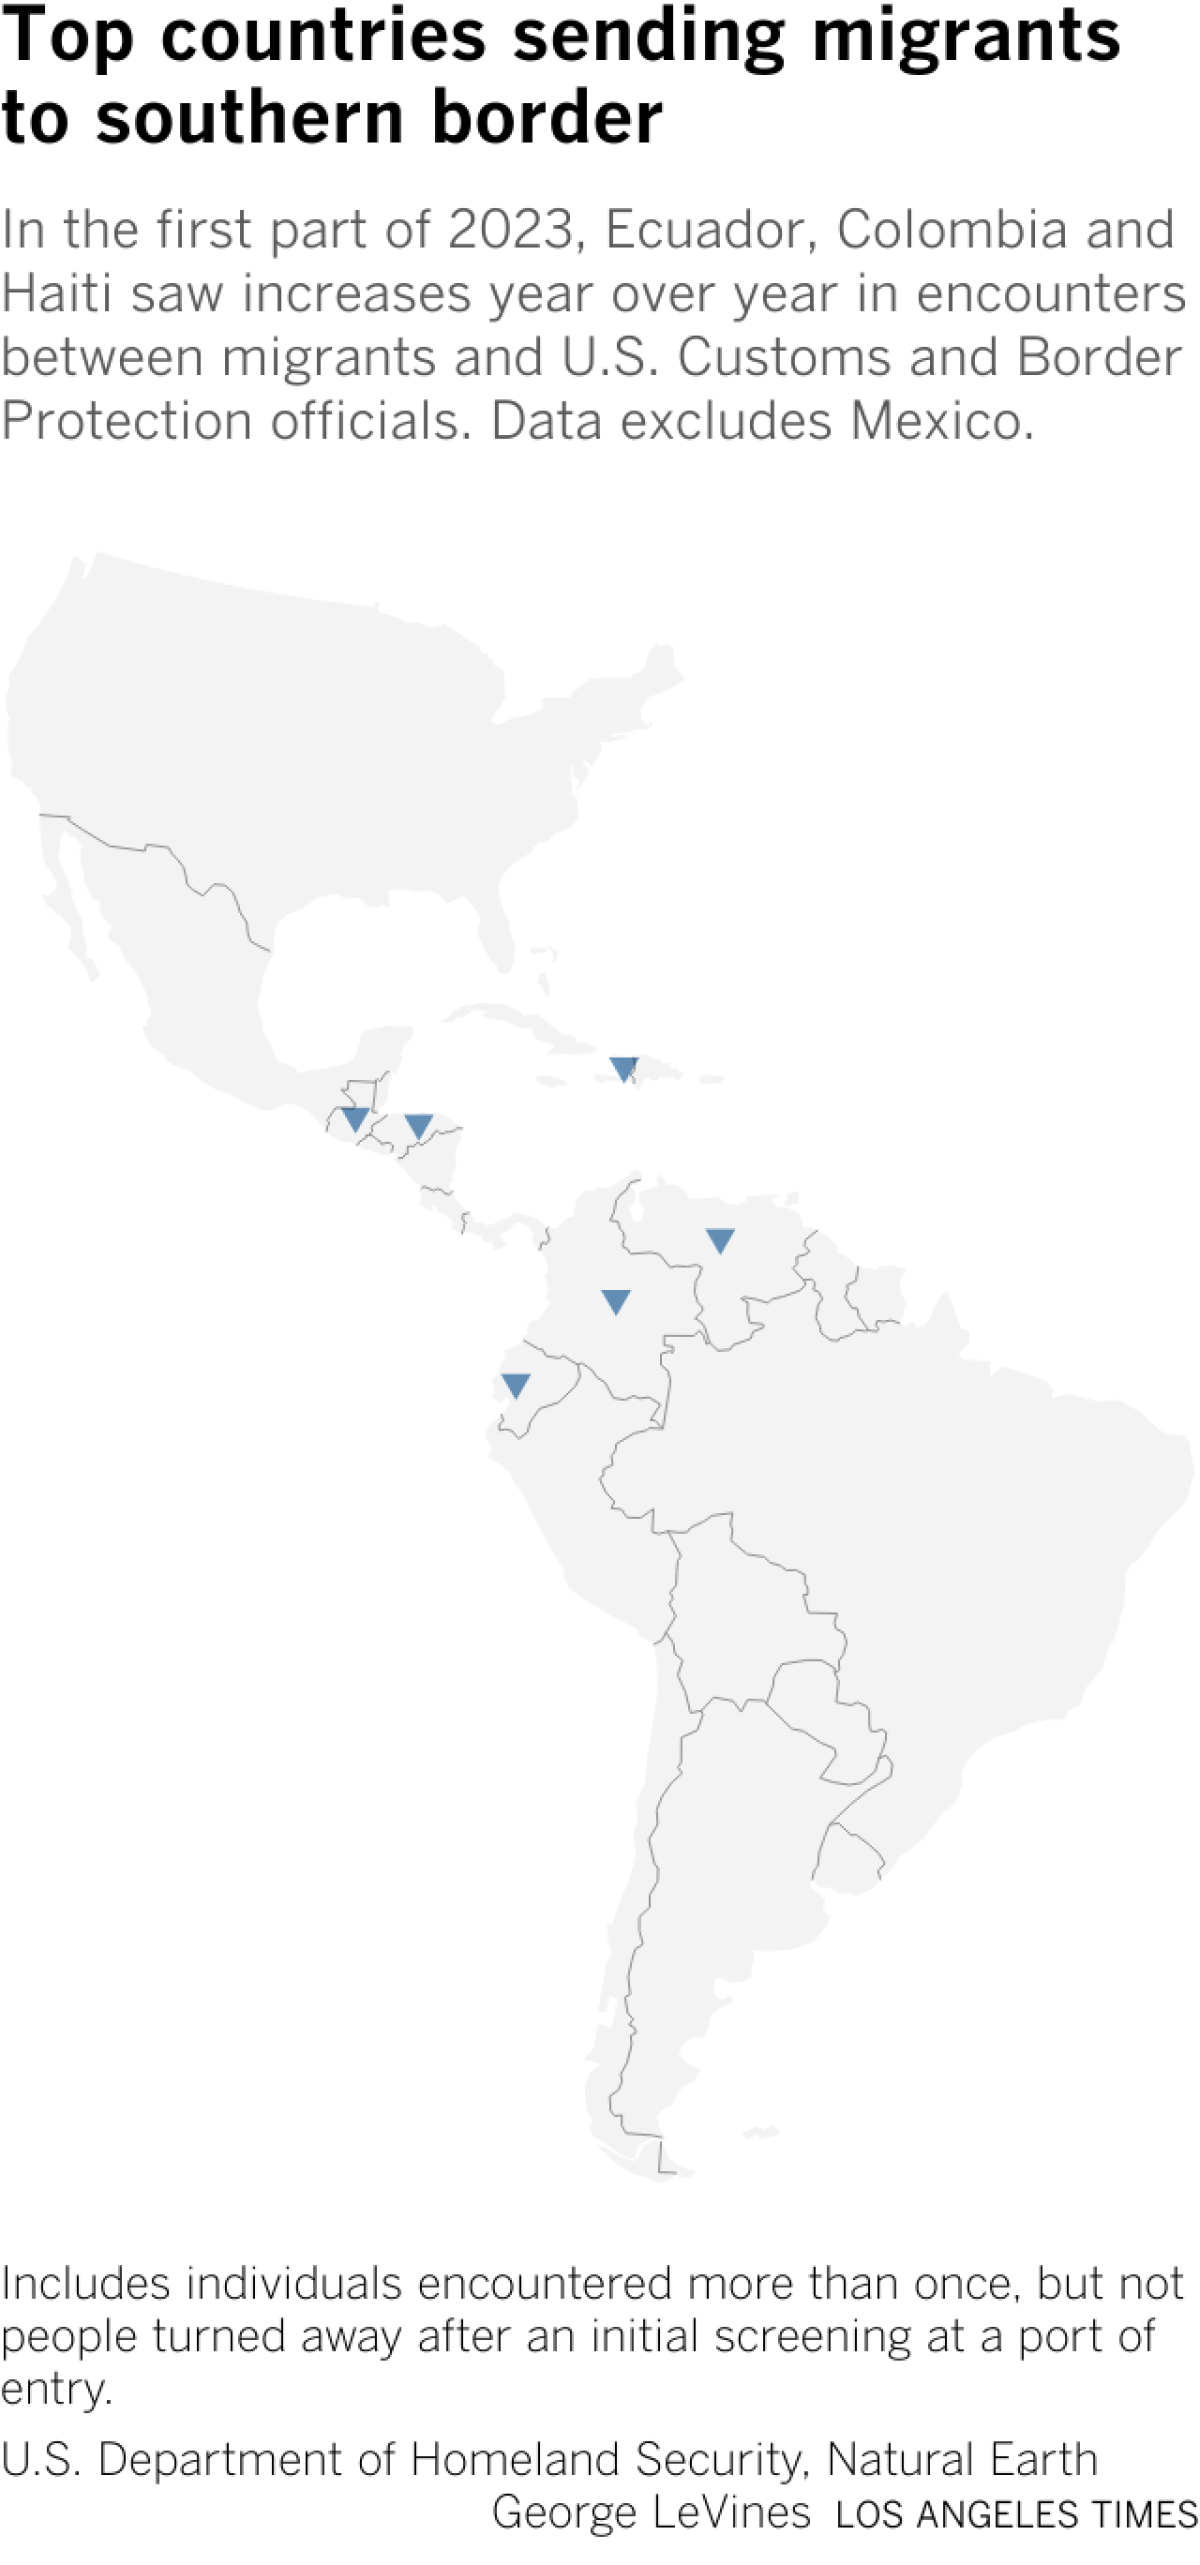 A map of the Americas, highlighting Guatemala, Honduras, Haiti, Ecuador, Colombia and Venezuela. Other than Mexico, those countries sent the most migrants to the U.S. Southern border in January and February of 2023.